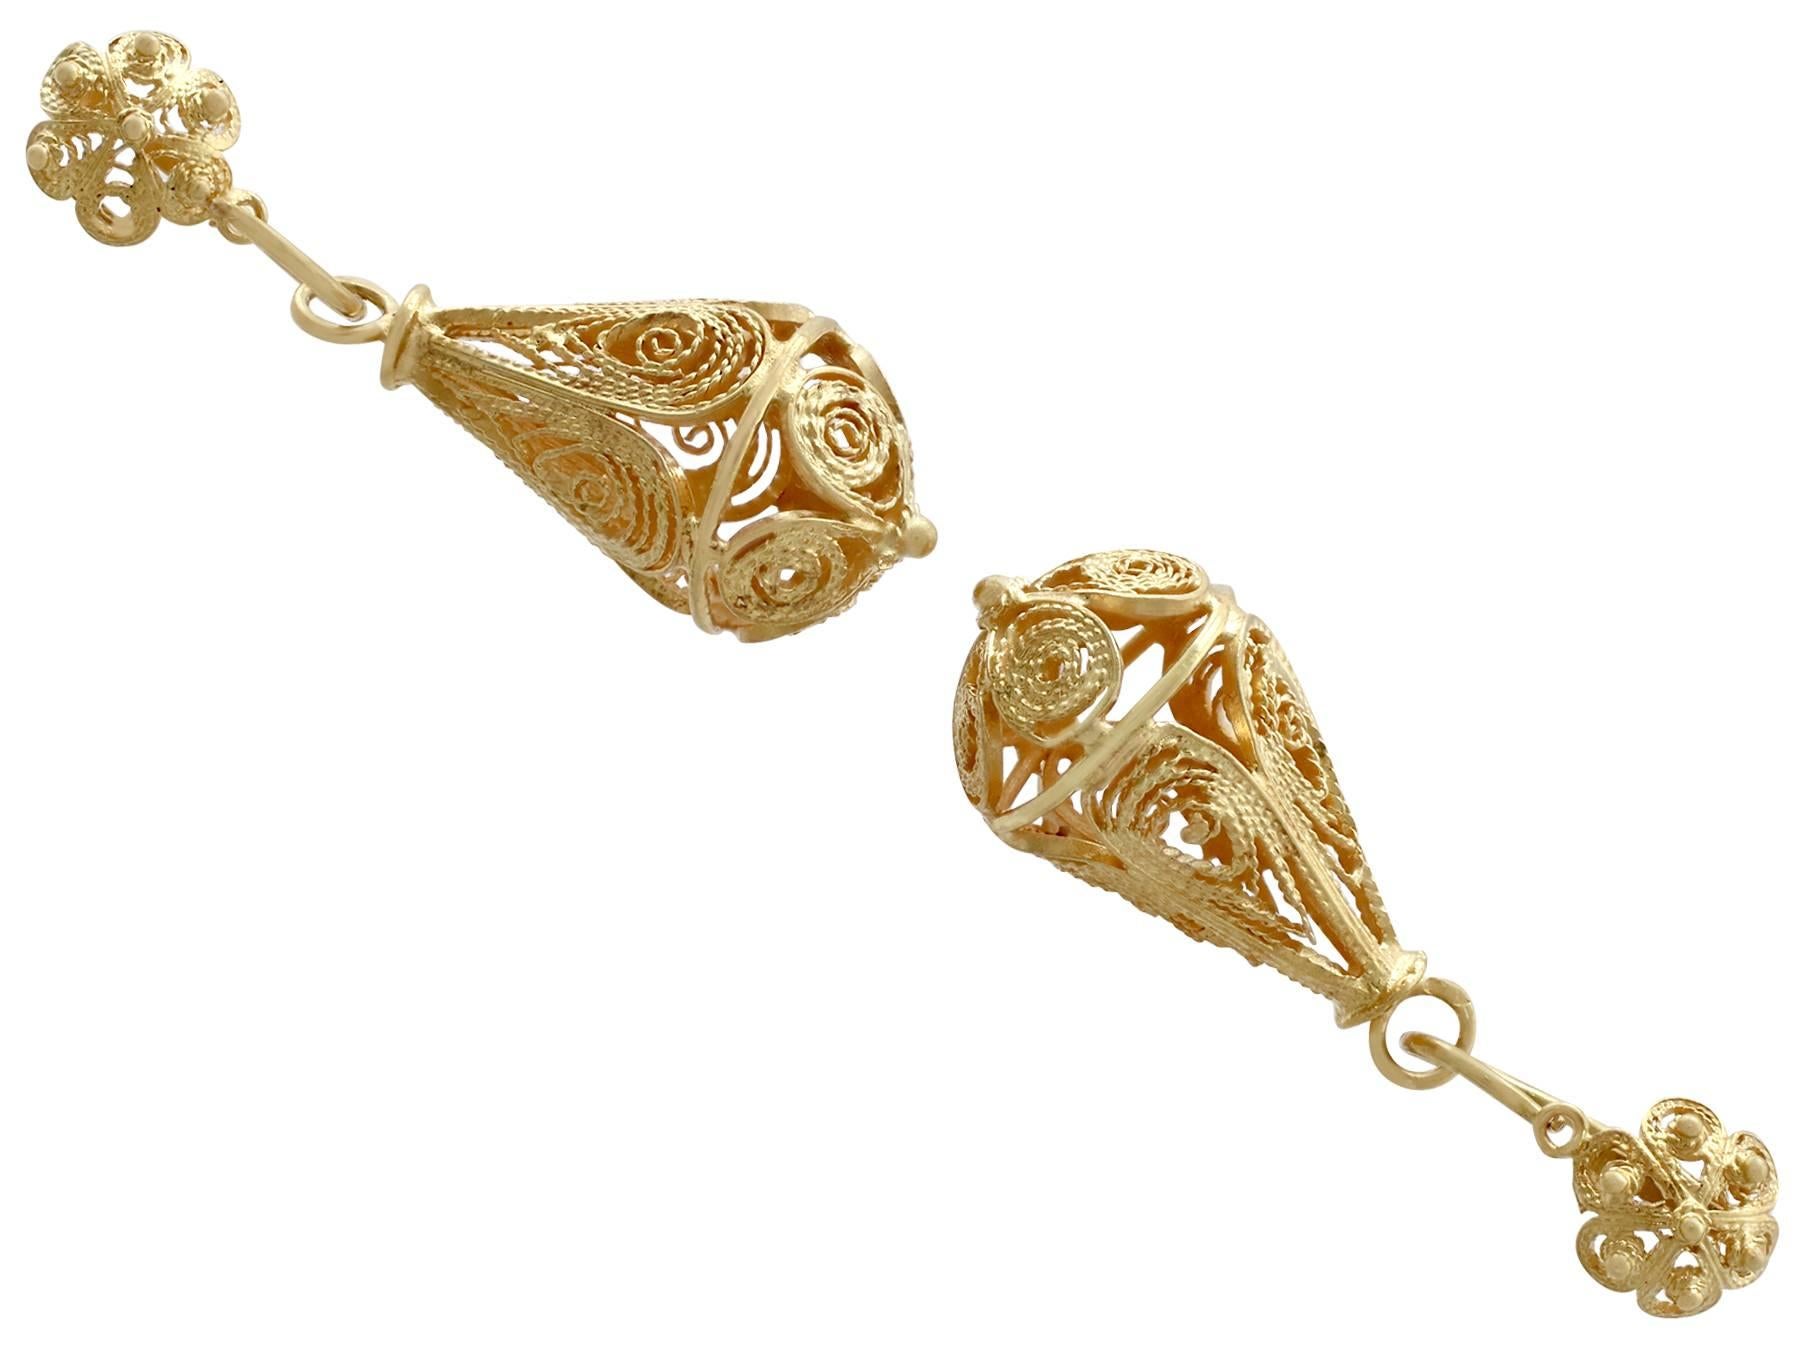 An impressive pair of antique Victorian 21 carat yellow gold drop earrings; part of our diverse antique jewellery and estate jewelry collections.

These fine and impressive Victorian gold drop earrings have been crafted in 21ct yellow gold.

Each